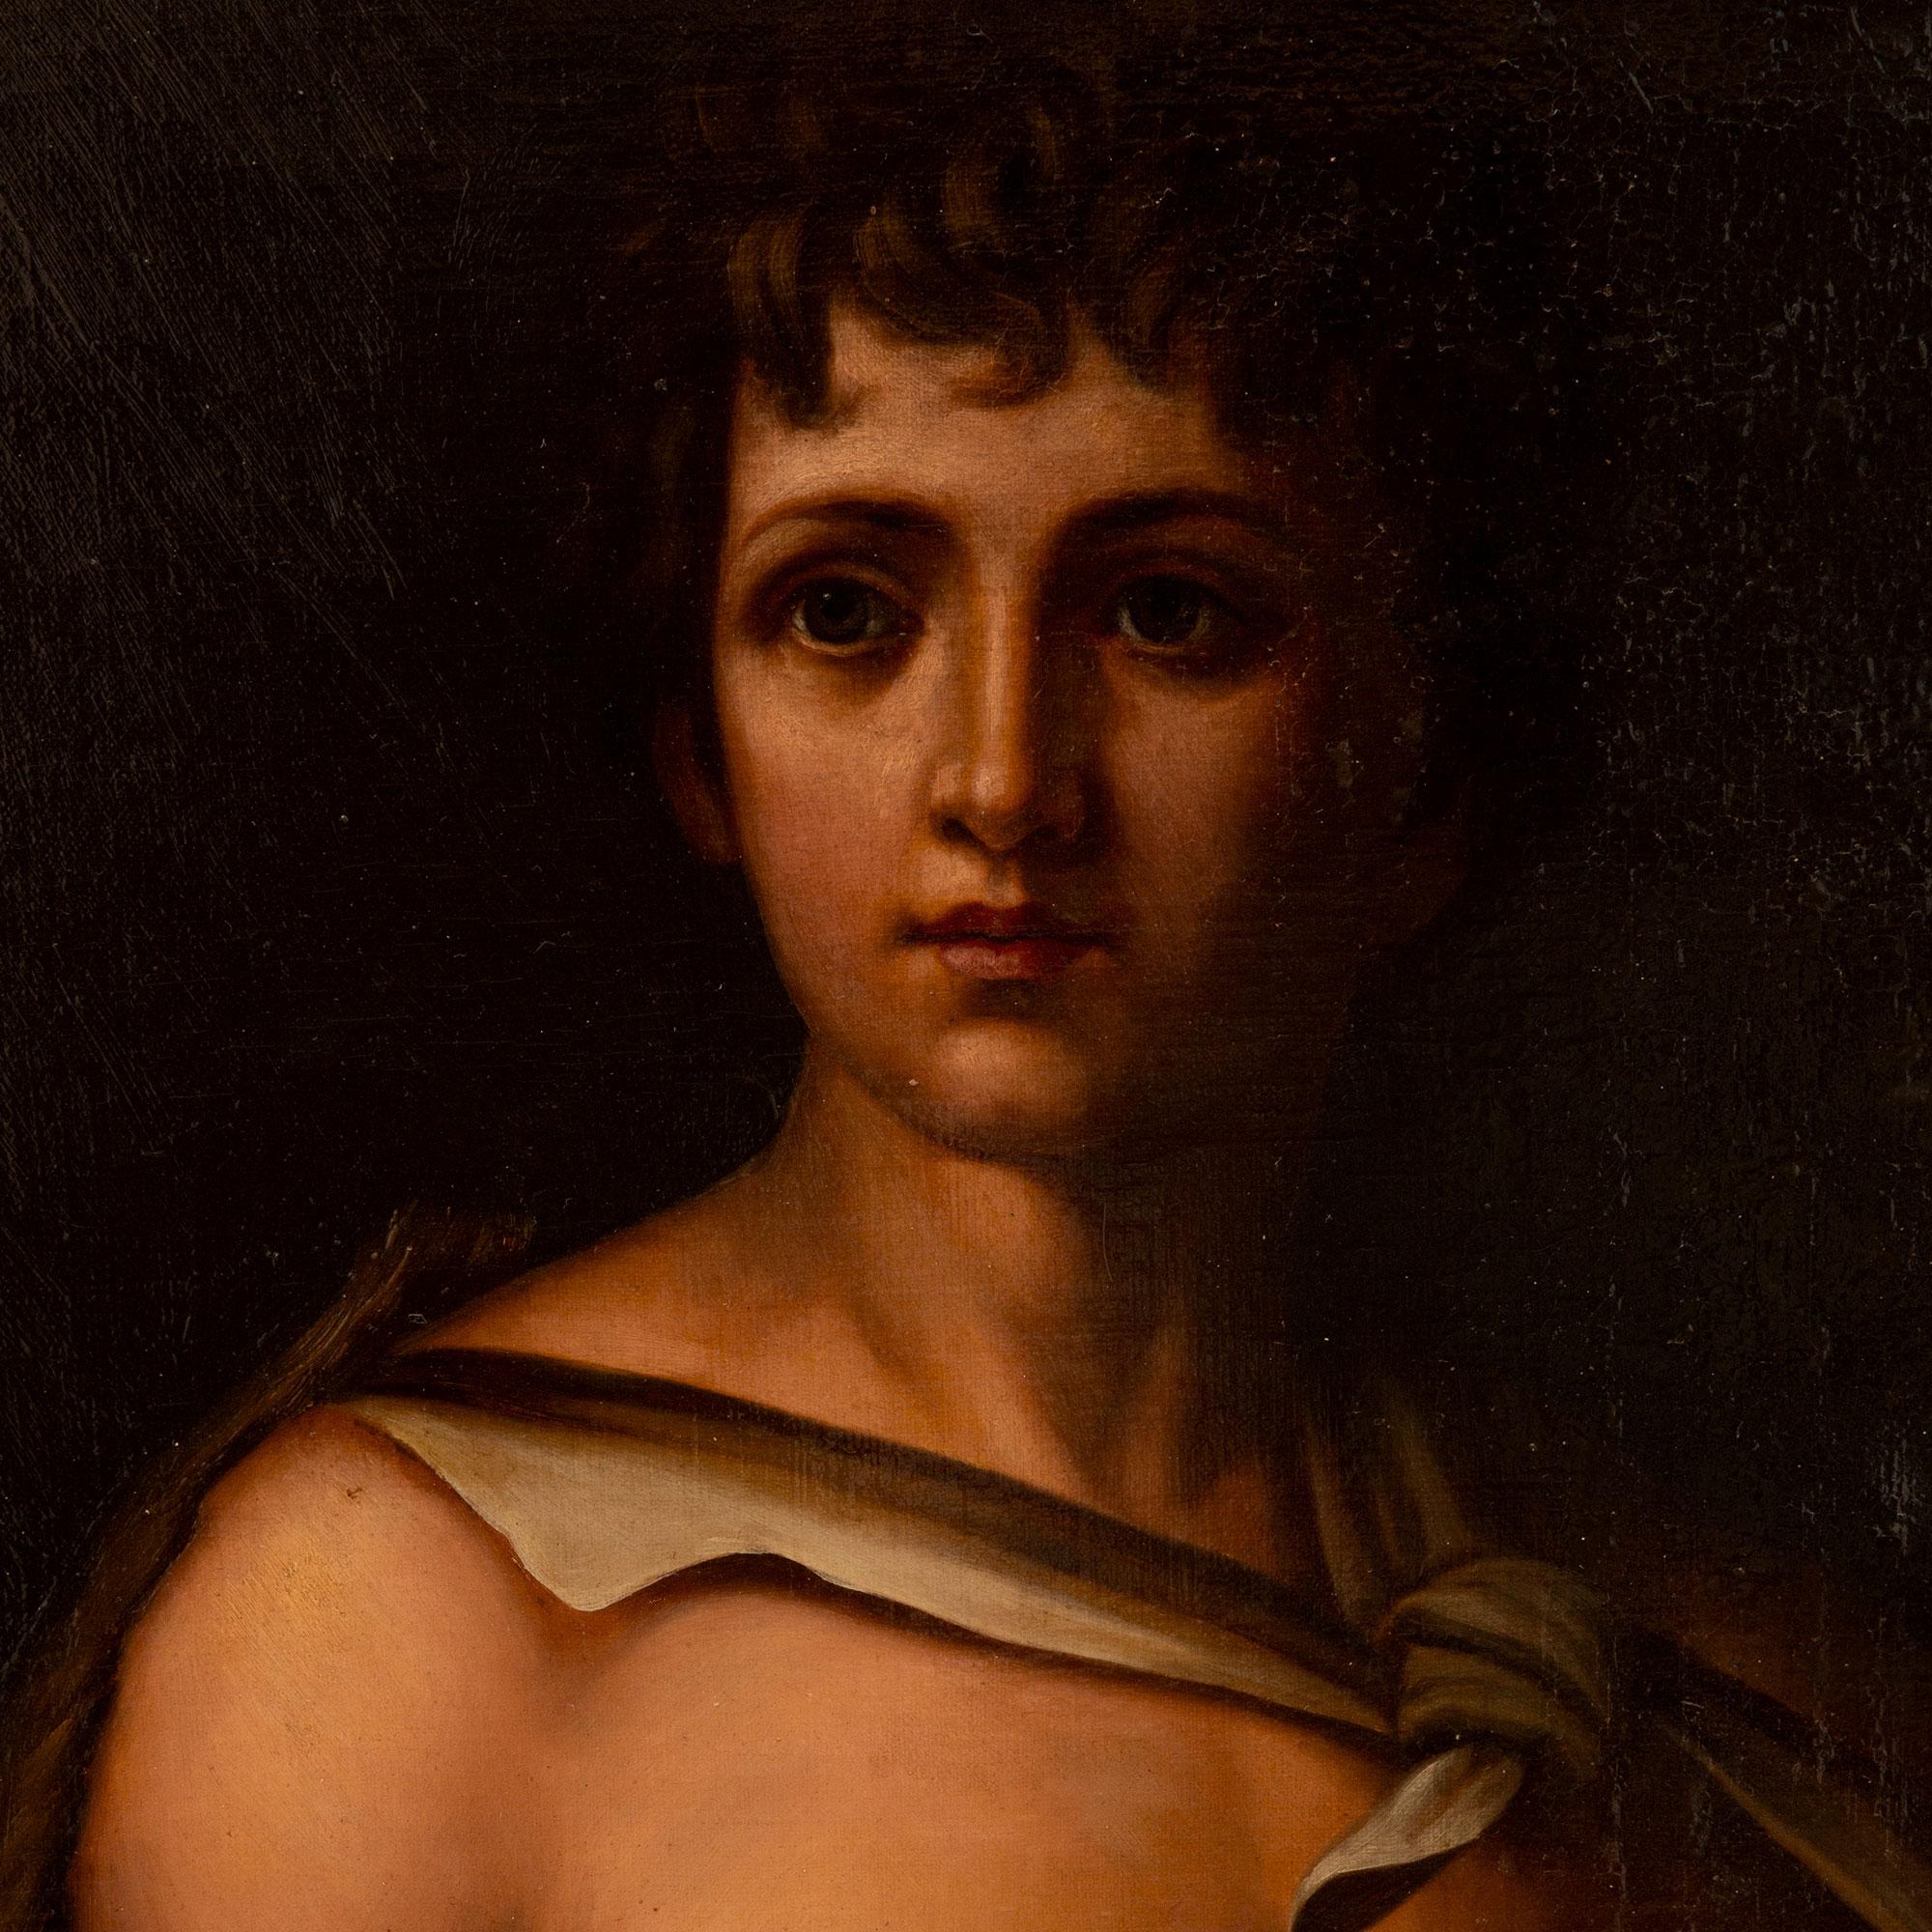 Italian 19th Century Neo-Classical St. Oil on Canvas Painting of a Young Man In Good Condition For Sale In West Palm Beach, FL